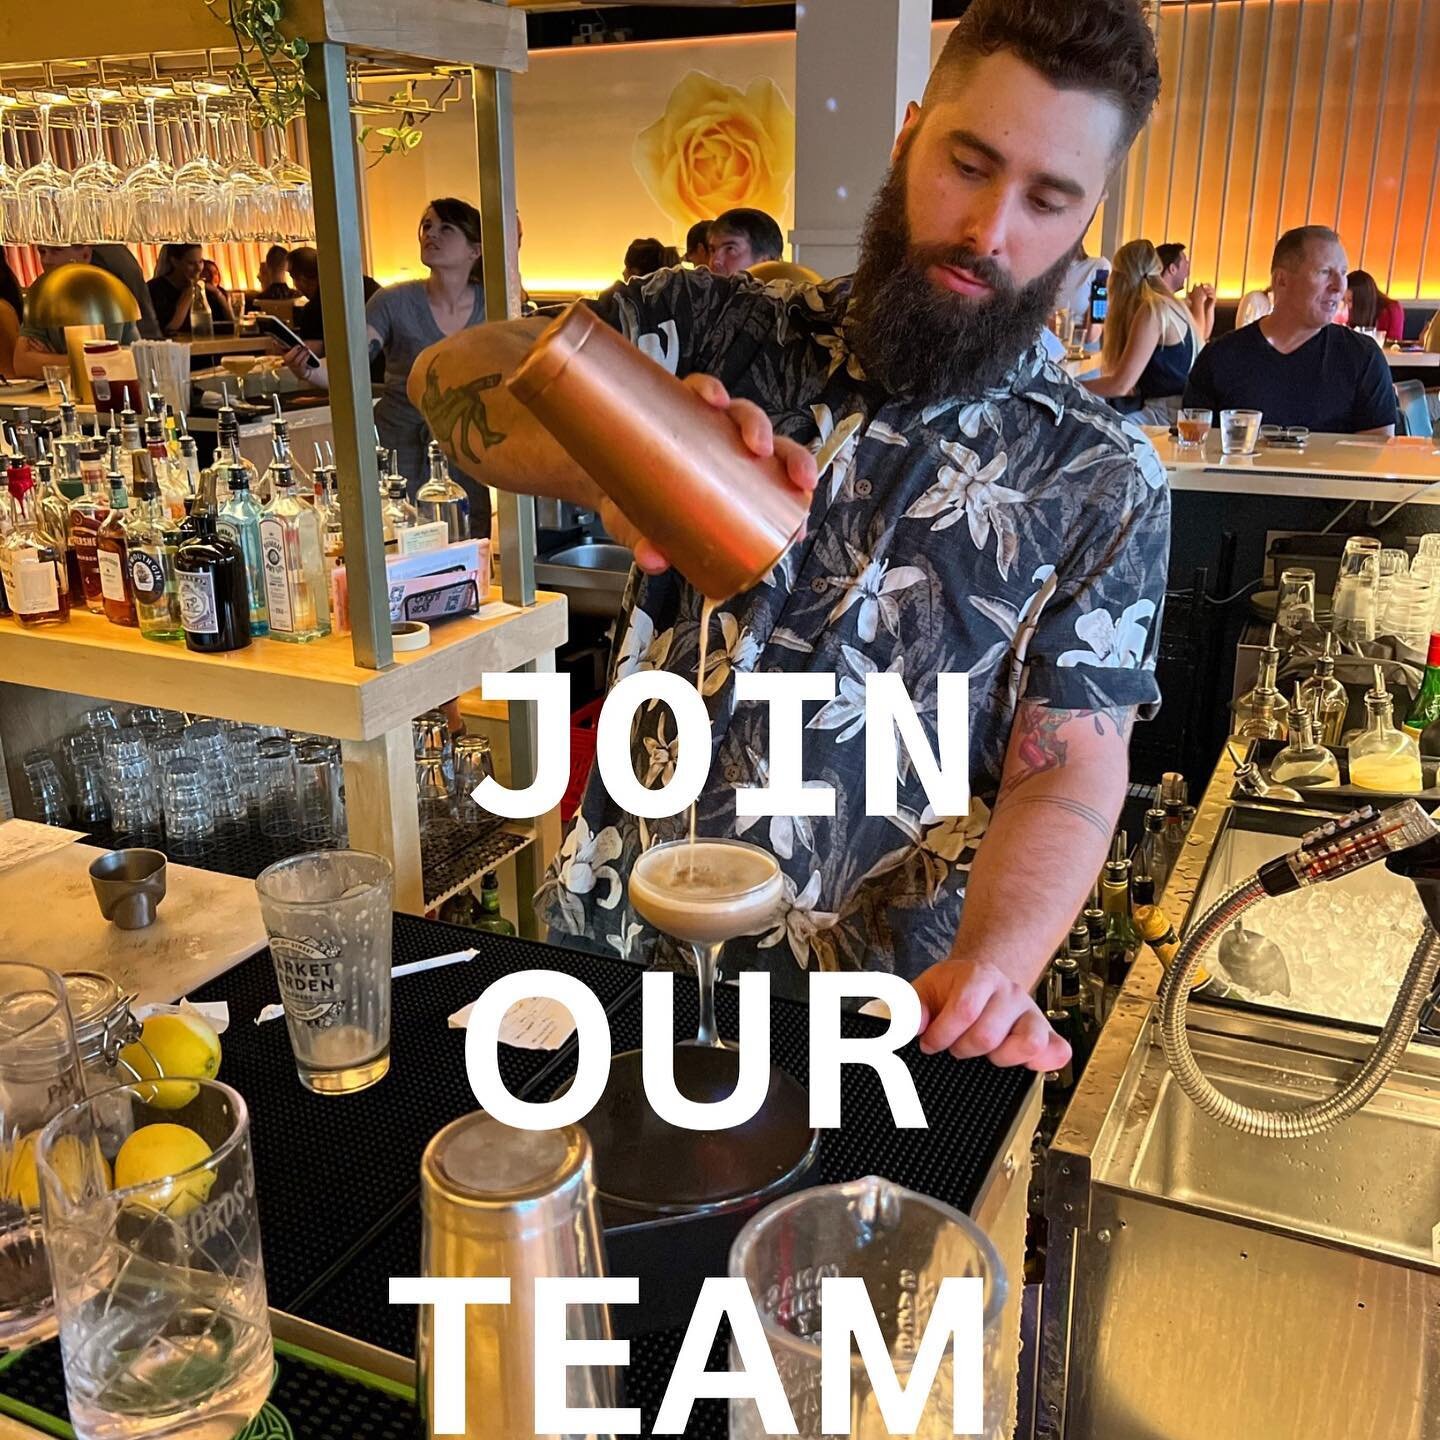 We are looking for passionate and energetic individuals, who enjoy the wide world of hospitality, to join our team. Does this sound like the job for you? Send your resume to hiring@marketgardenbrewery.com or visit:
https://www.brightsidecle.com/ and 